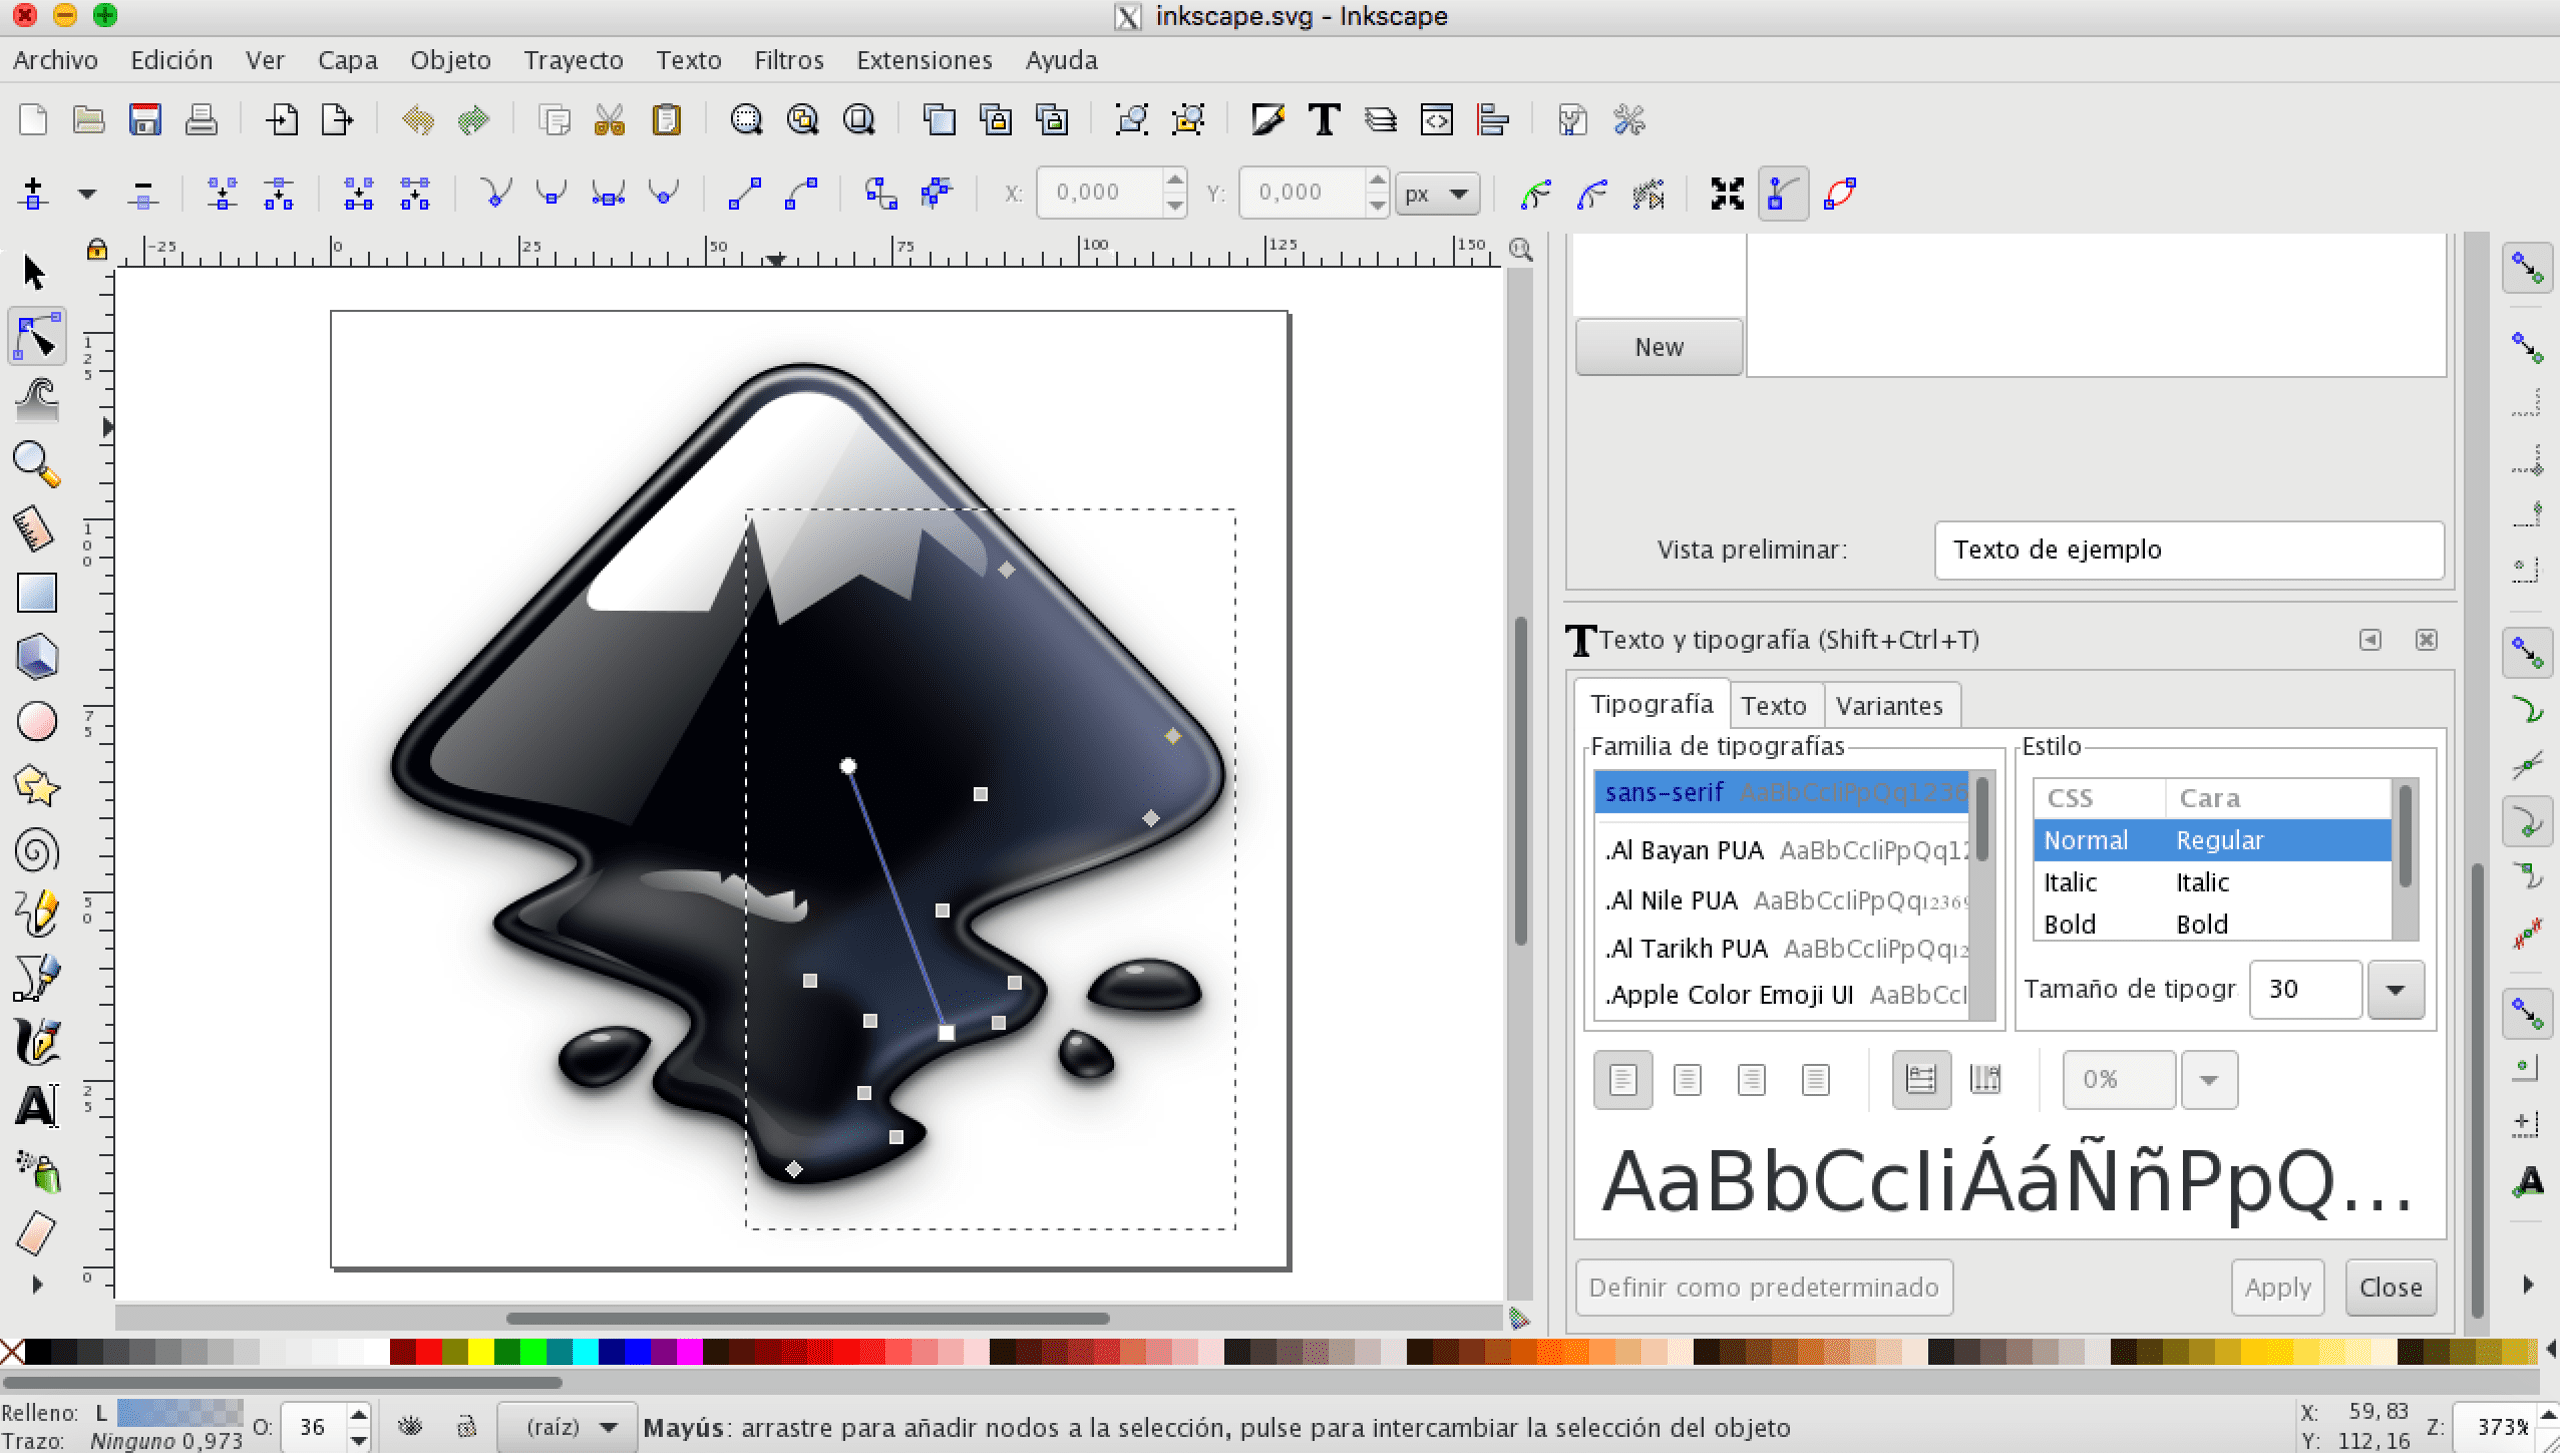 inkscape for mac osx 10.5.0